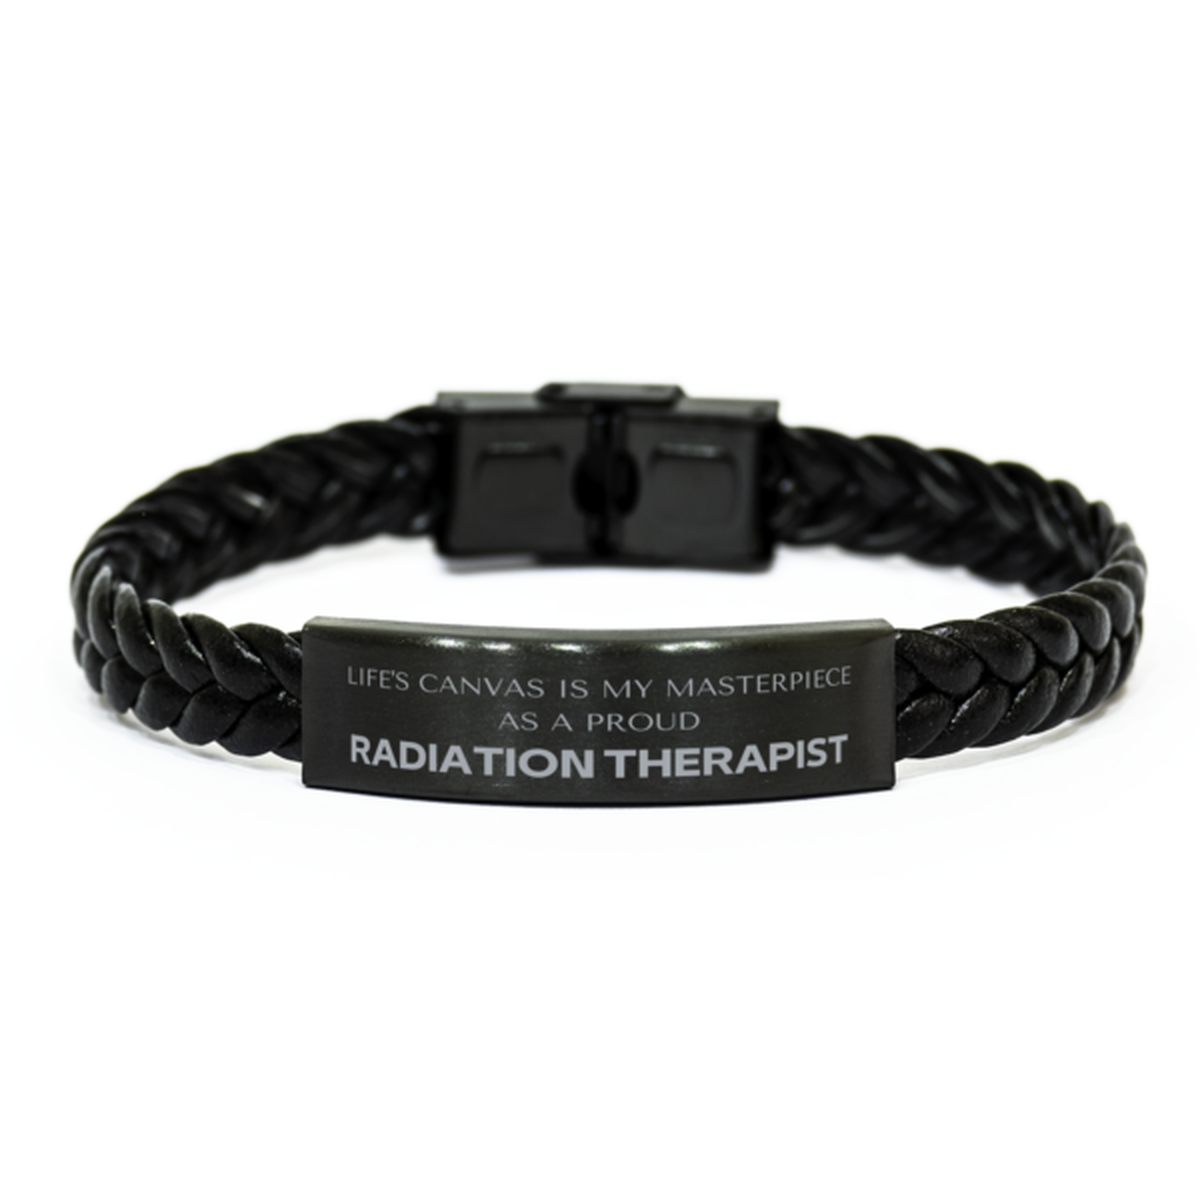 Proud Radiation Therapist Gifts, Life's canvas is my masterpiece, Epic Birthday Christmas Unique Braided Leather Bracelet For Radiation Therapist, Coworkers, Men, Women, Friends